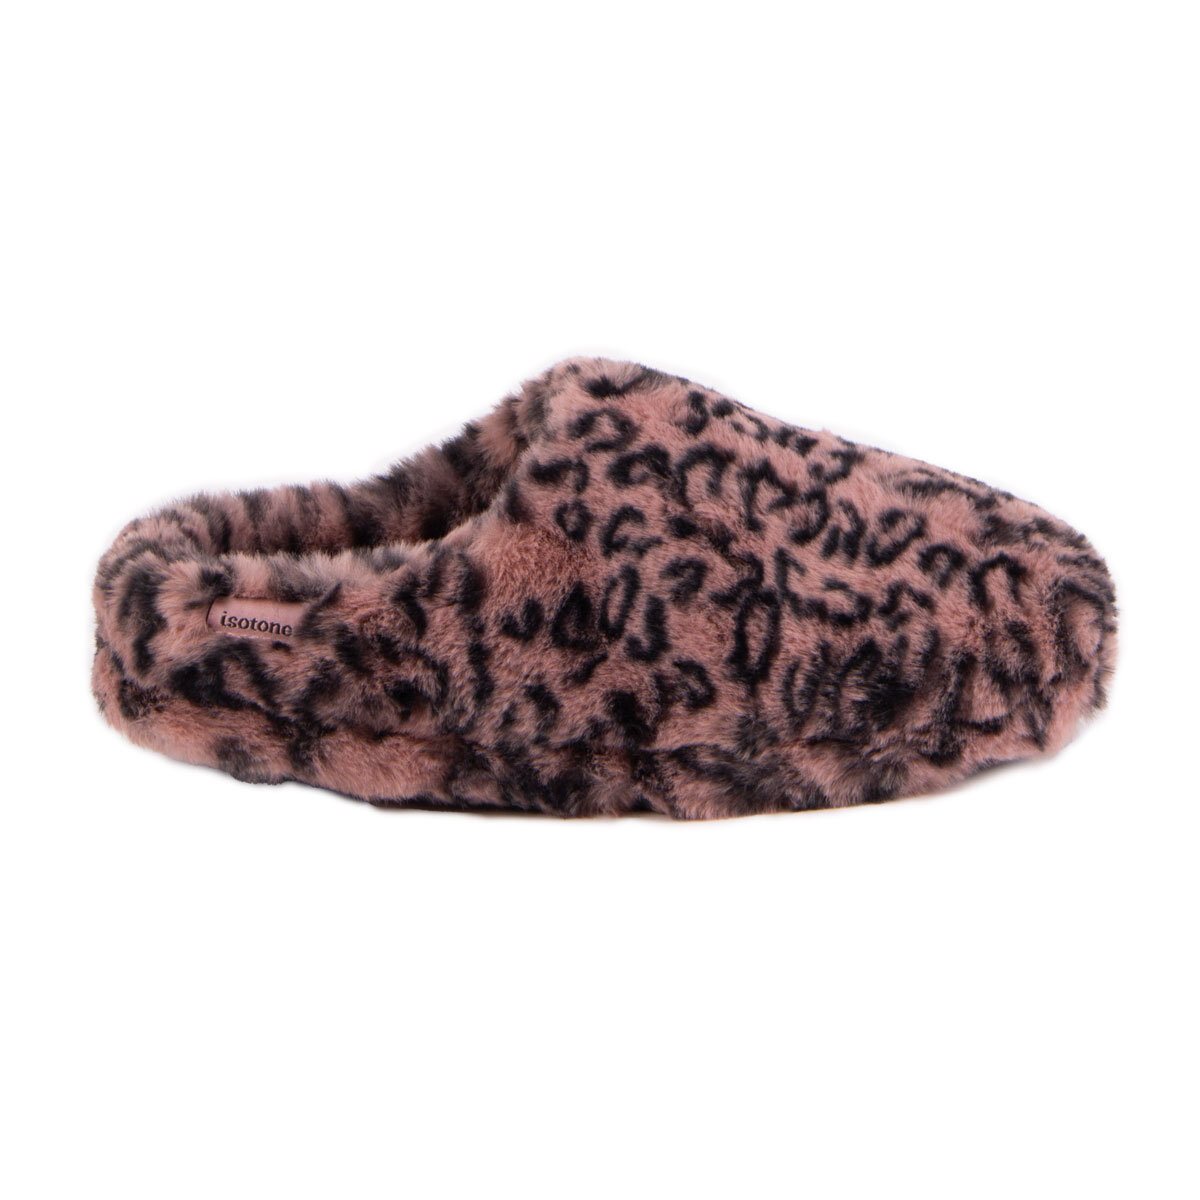 Totes Isotoner Pillowstep Women's Mule Slippers in Pink Animal Print